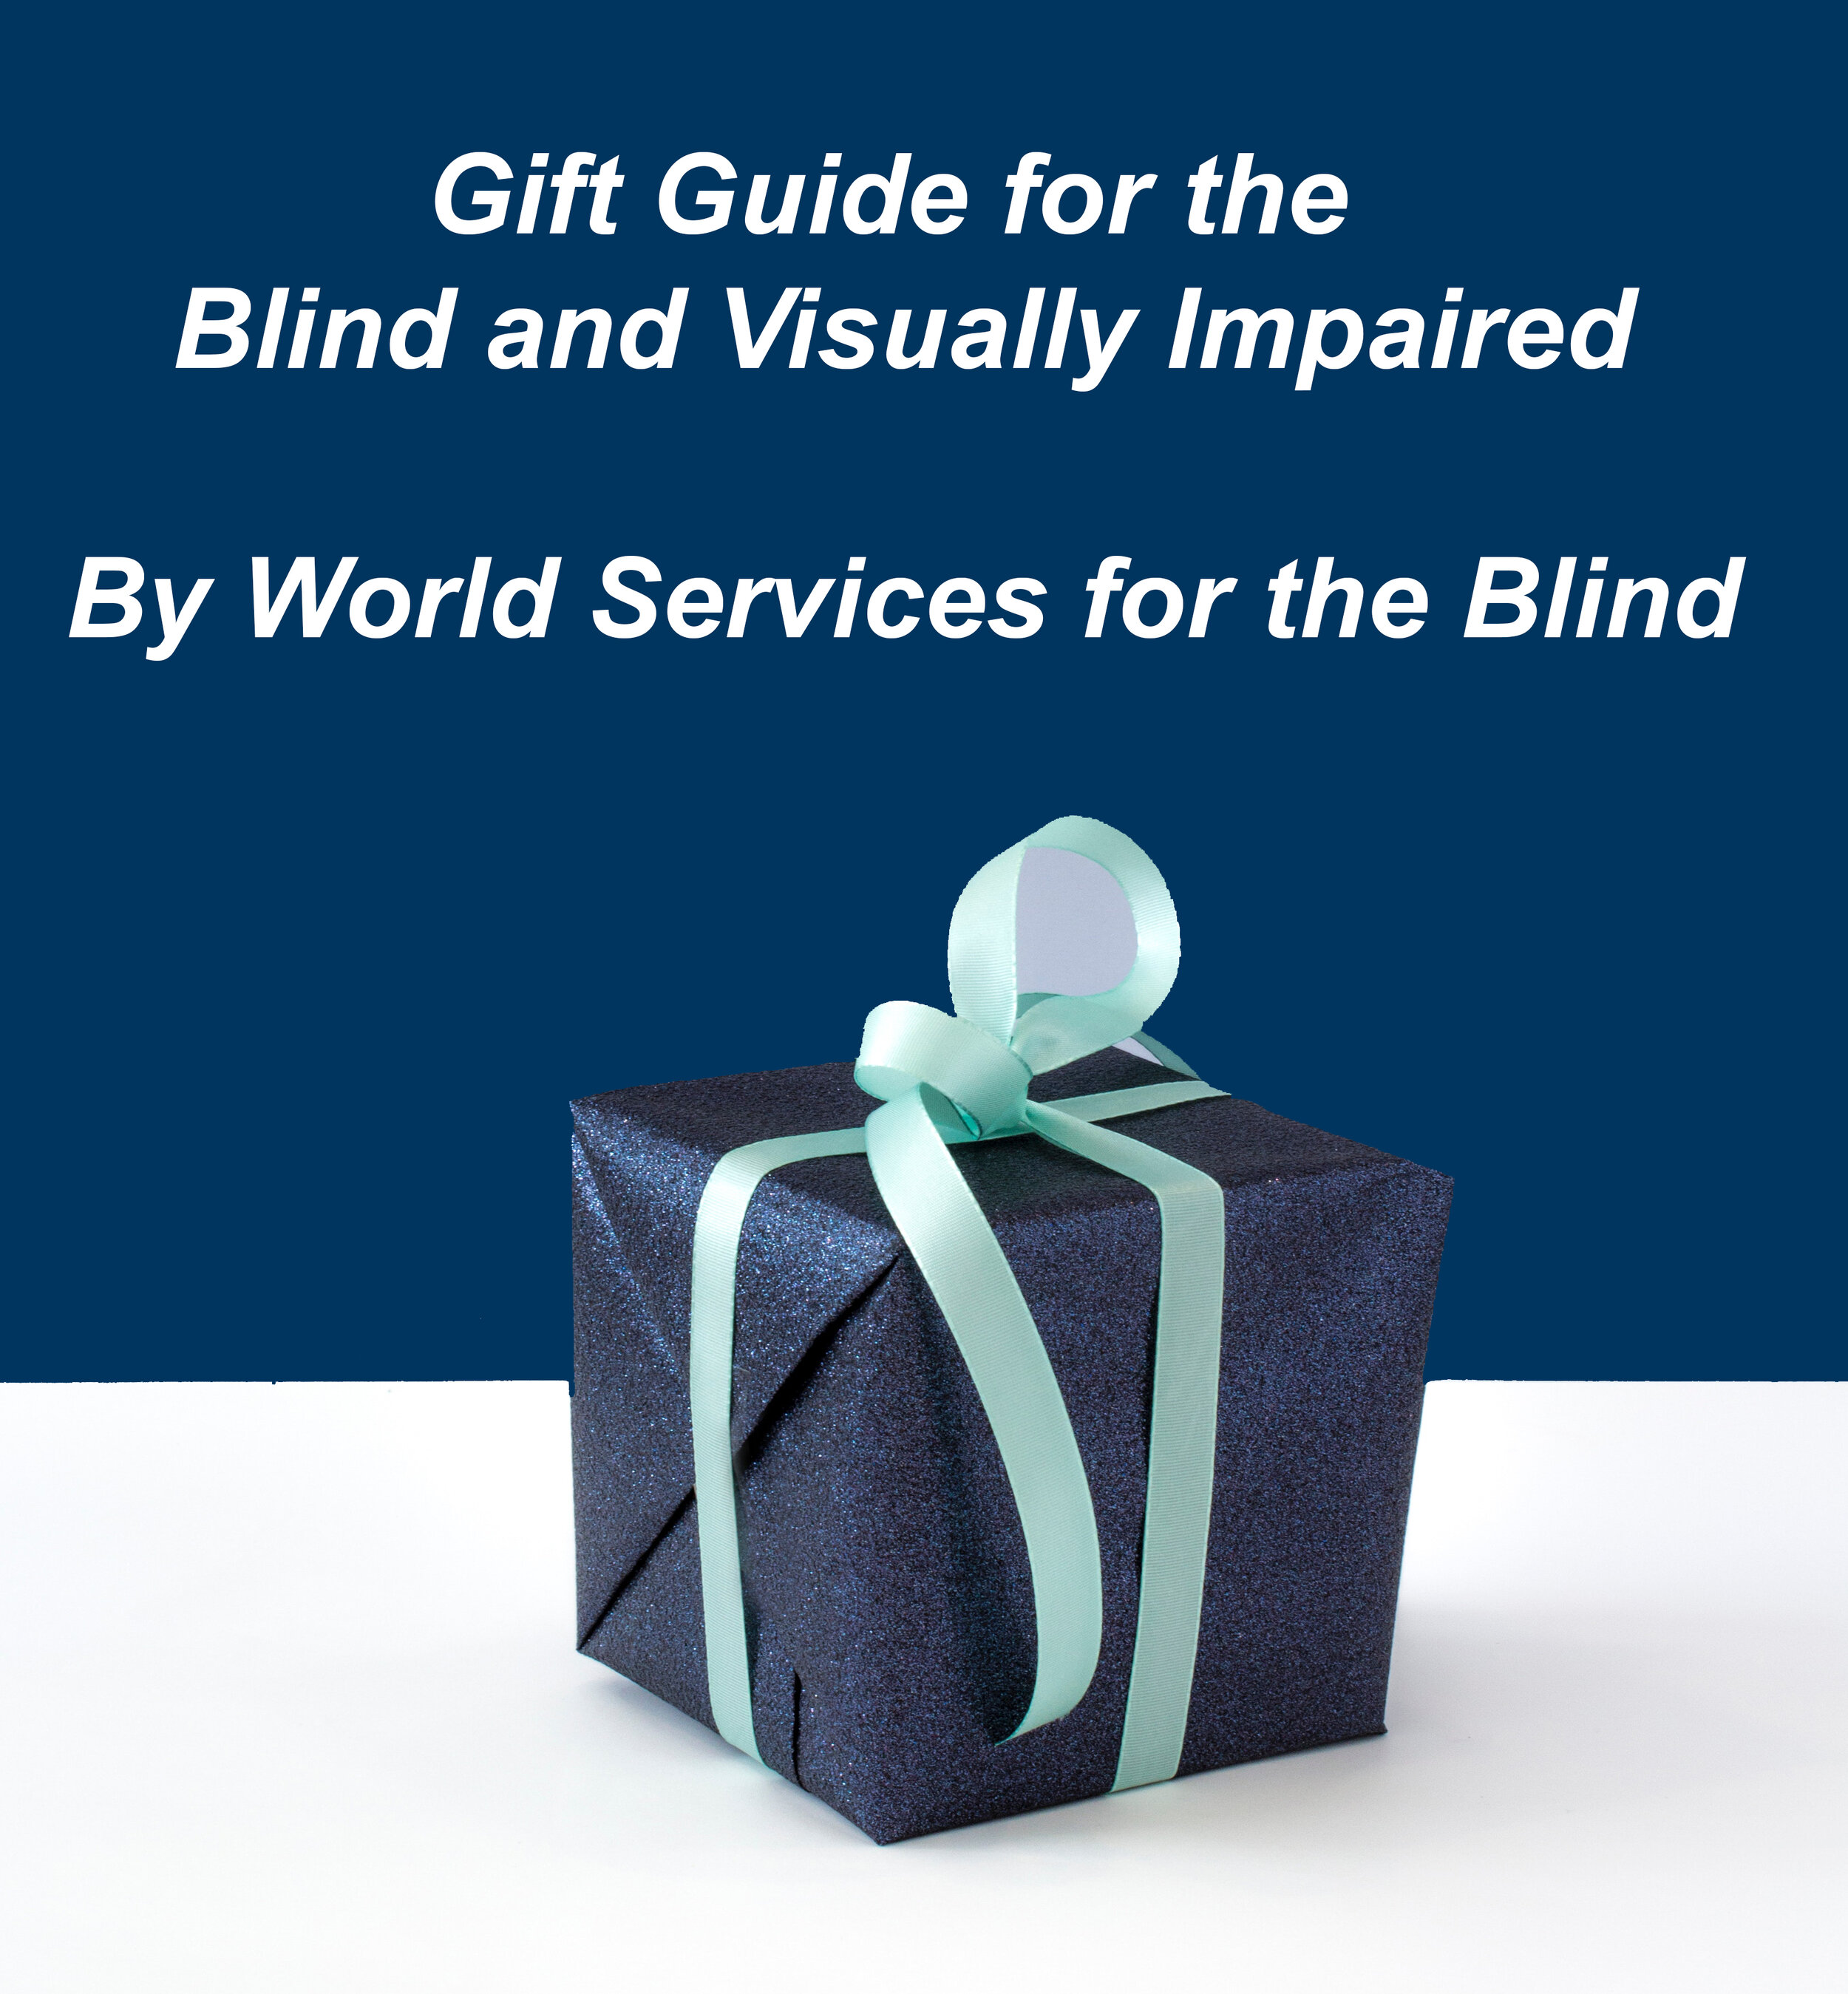 Gift Ideas for Kids Who Are Blind, Visually Impaired or Have Additional  Disabilities – Paths to Literacy